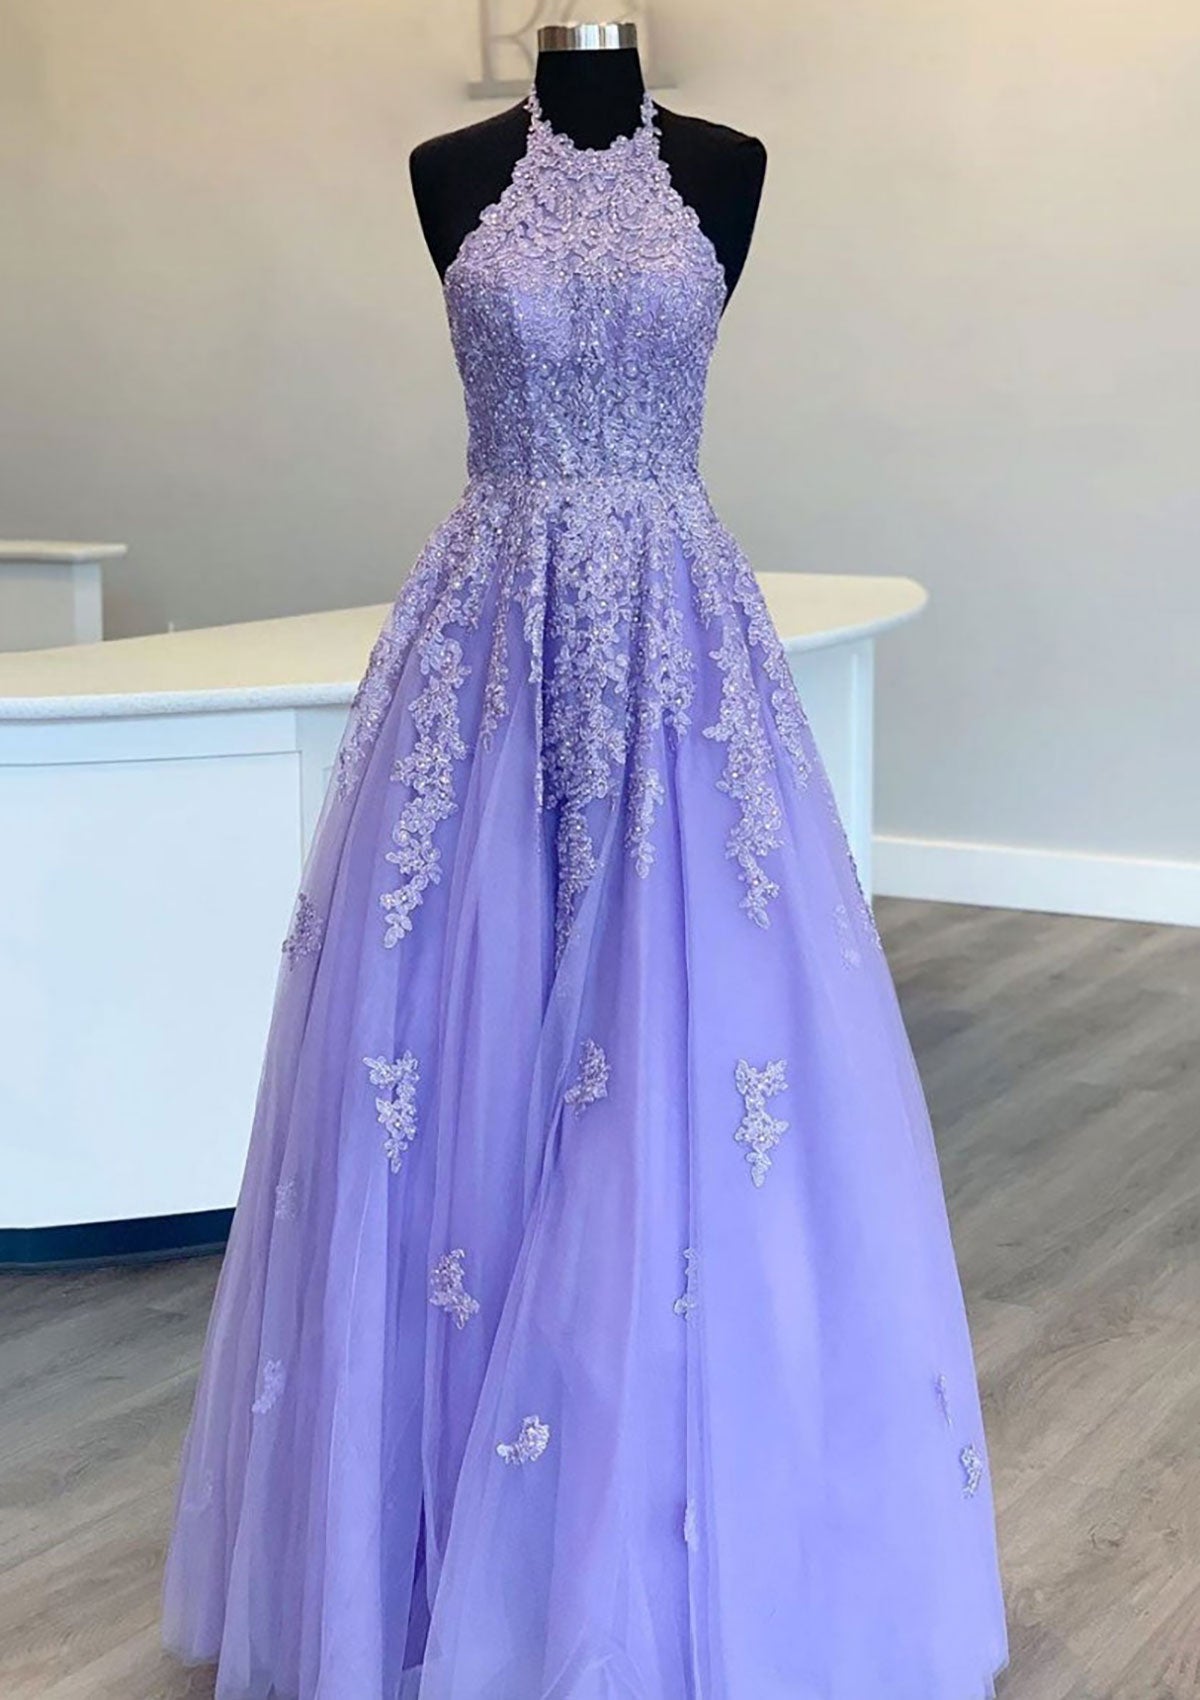 Princess Halter Long/Floor-Length Lace Tulle Prom Dress With Appliqued Beading - dennisdresses